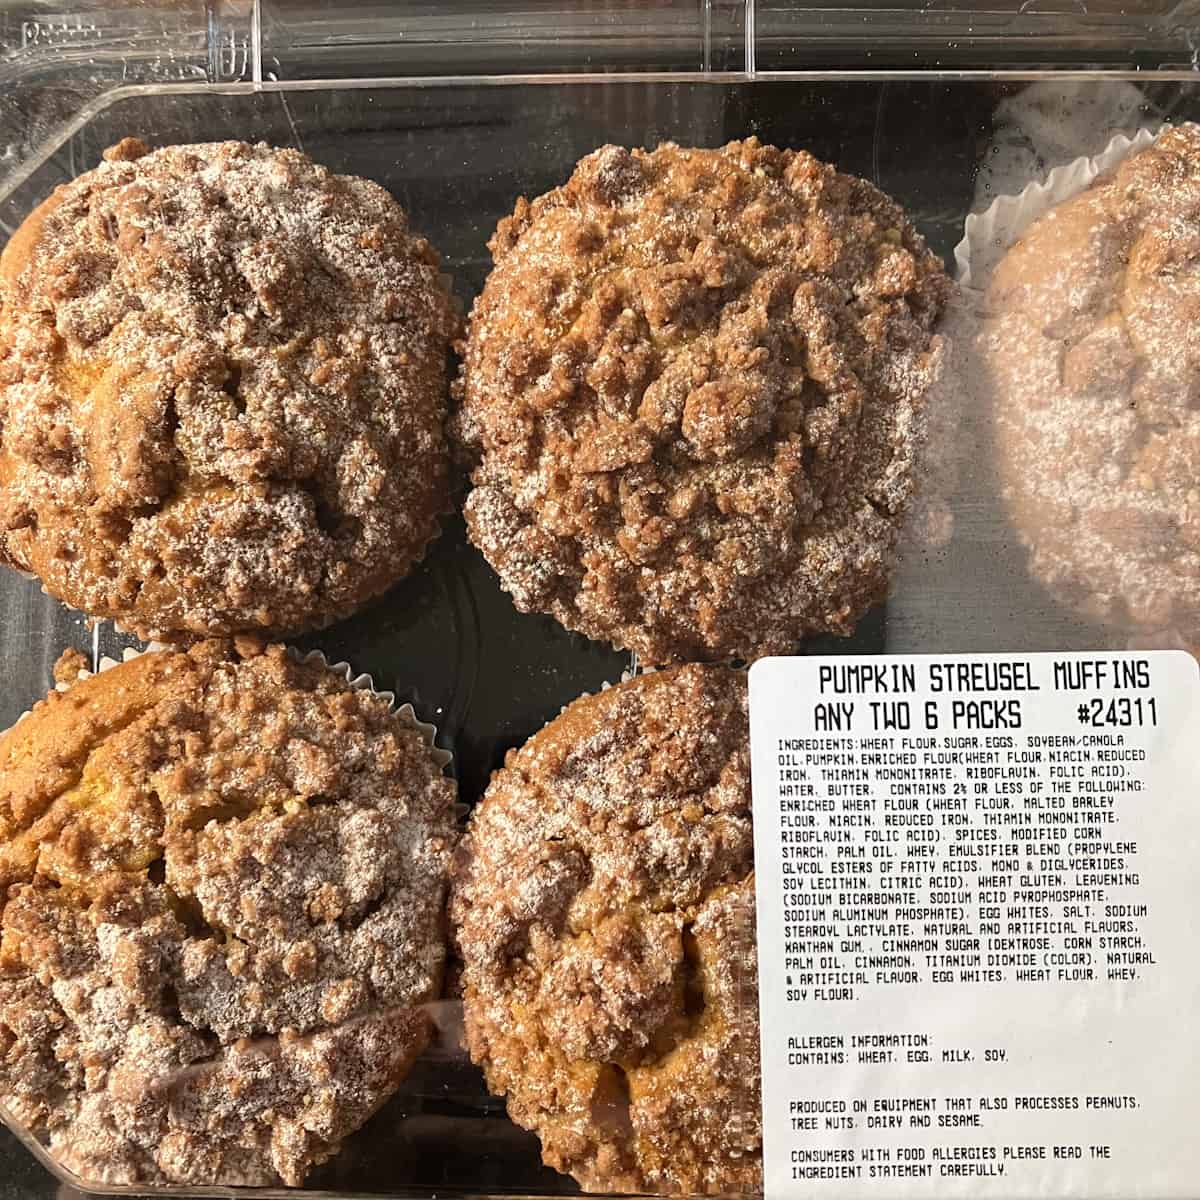 muffins from costco